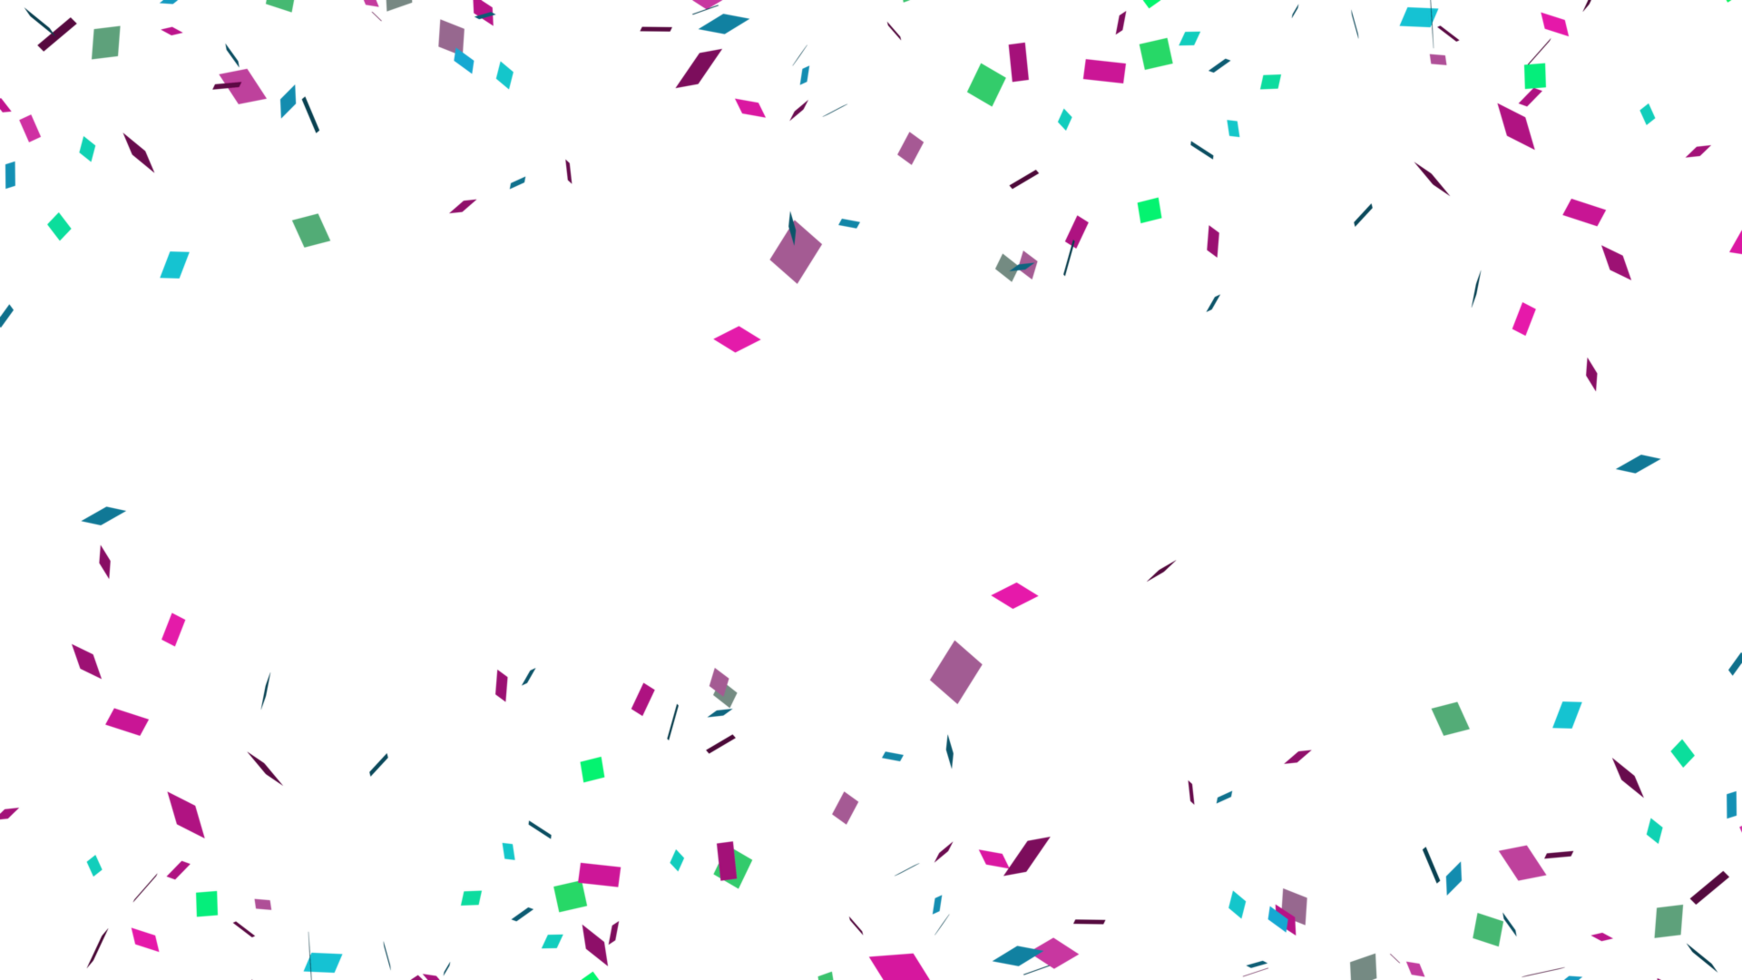 Abstract celebration party with falling paper confetti transparent elements decoration png